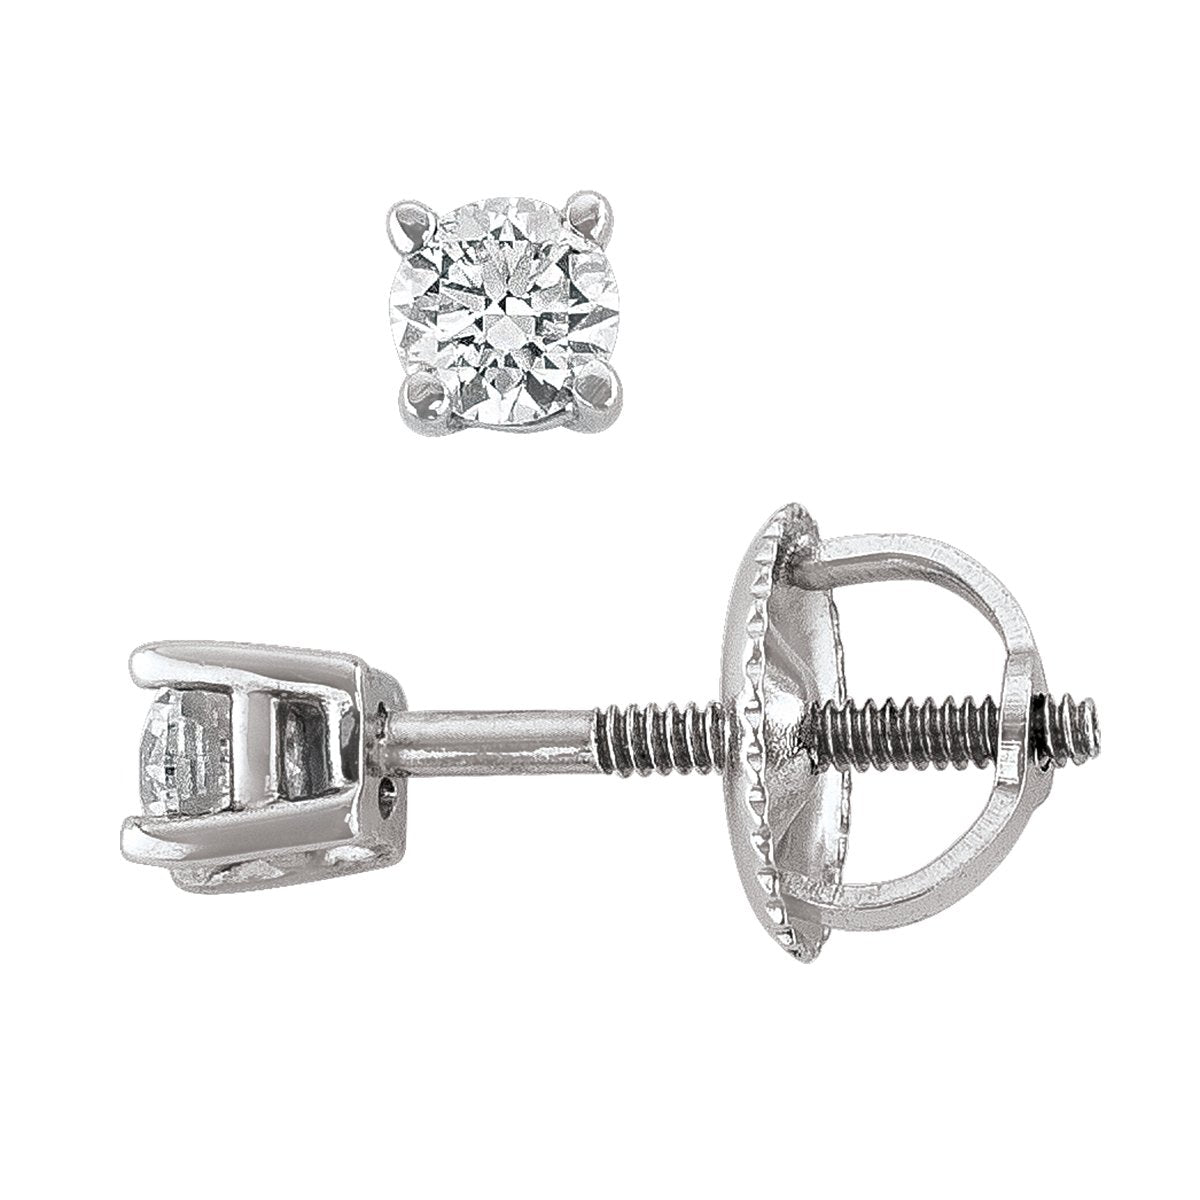 DIAMOND EARRINGS WHITE GOLD DIAMOND 4-CLAW SCREW BACK STUD S (AVAILABE IN VARIOUS STONE SIZE).